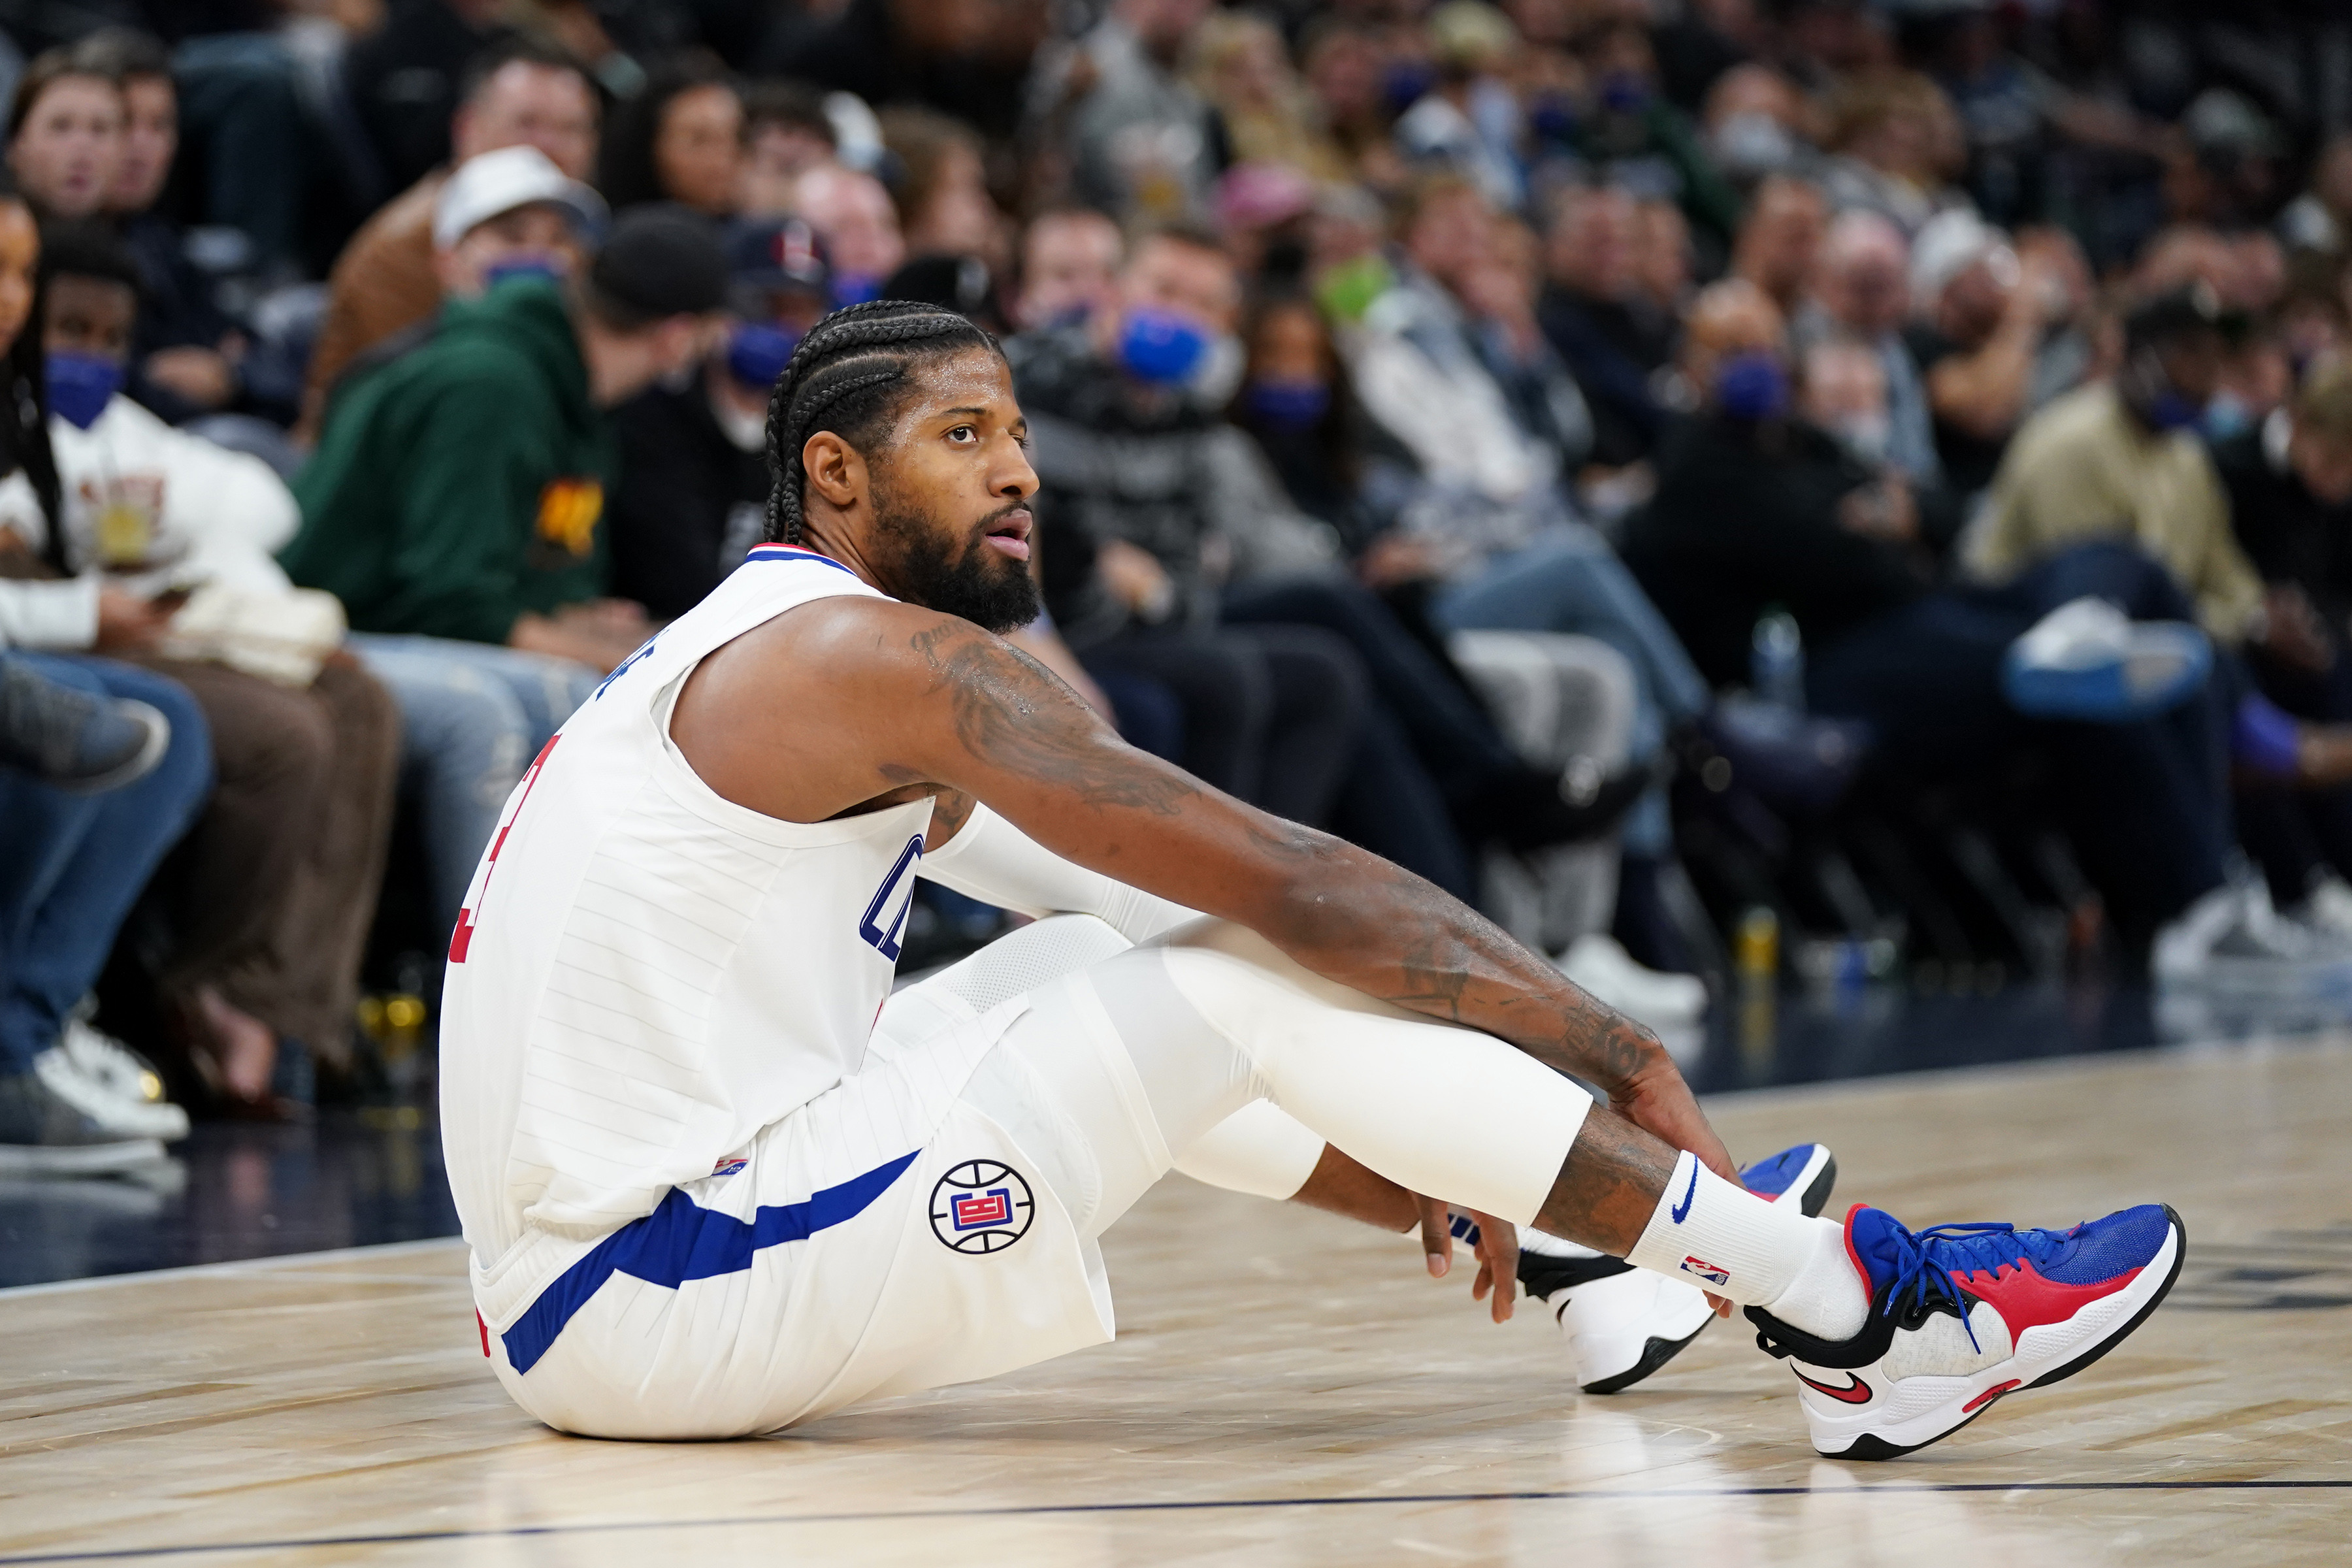 Paul George #13 of the LA Clippers during the game against the LA Clippers on November 5, 2021 at Target Center in Minneapolis, Minnesota.